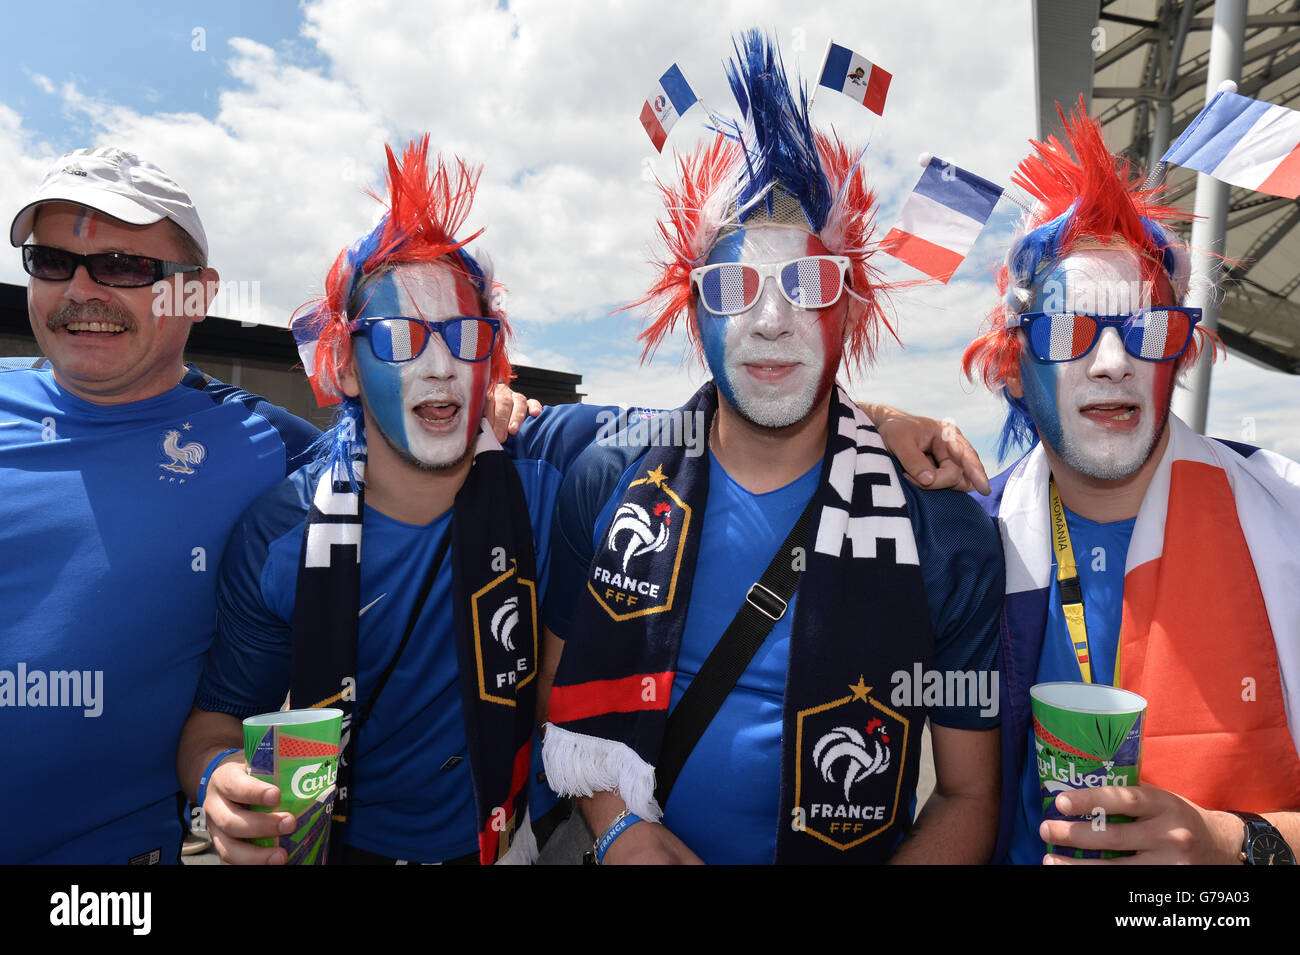 26.06.2016. Lyon, France. UEFA European 2016 Football Championships, last 16. France versus Republic of Ireland.  Supporters of France in Fancy dress Stock Photo